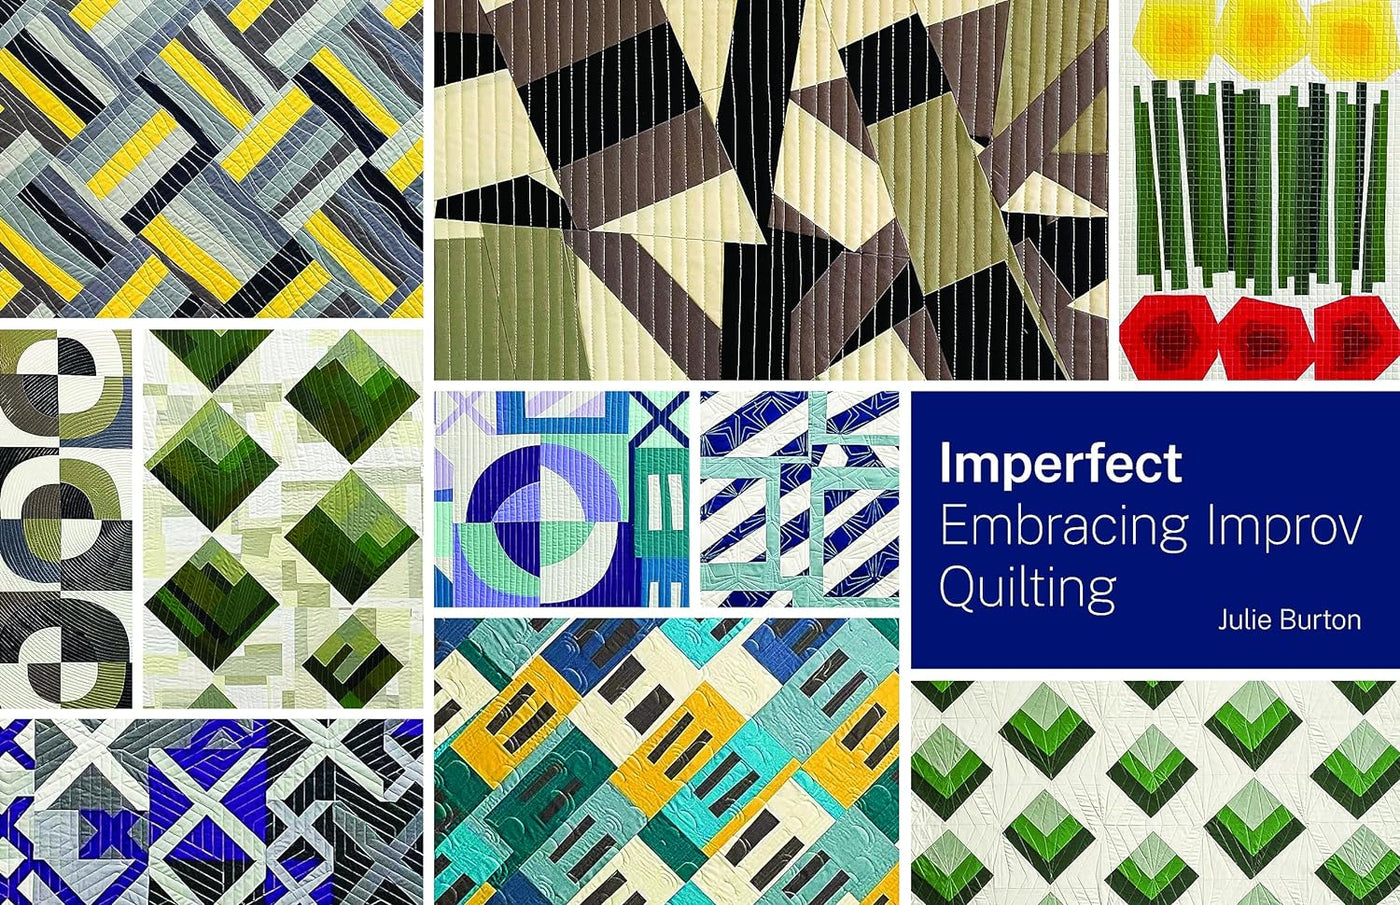 Imperfect - Embracing Improv Quilting by Julie Burton